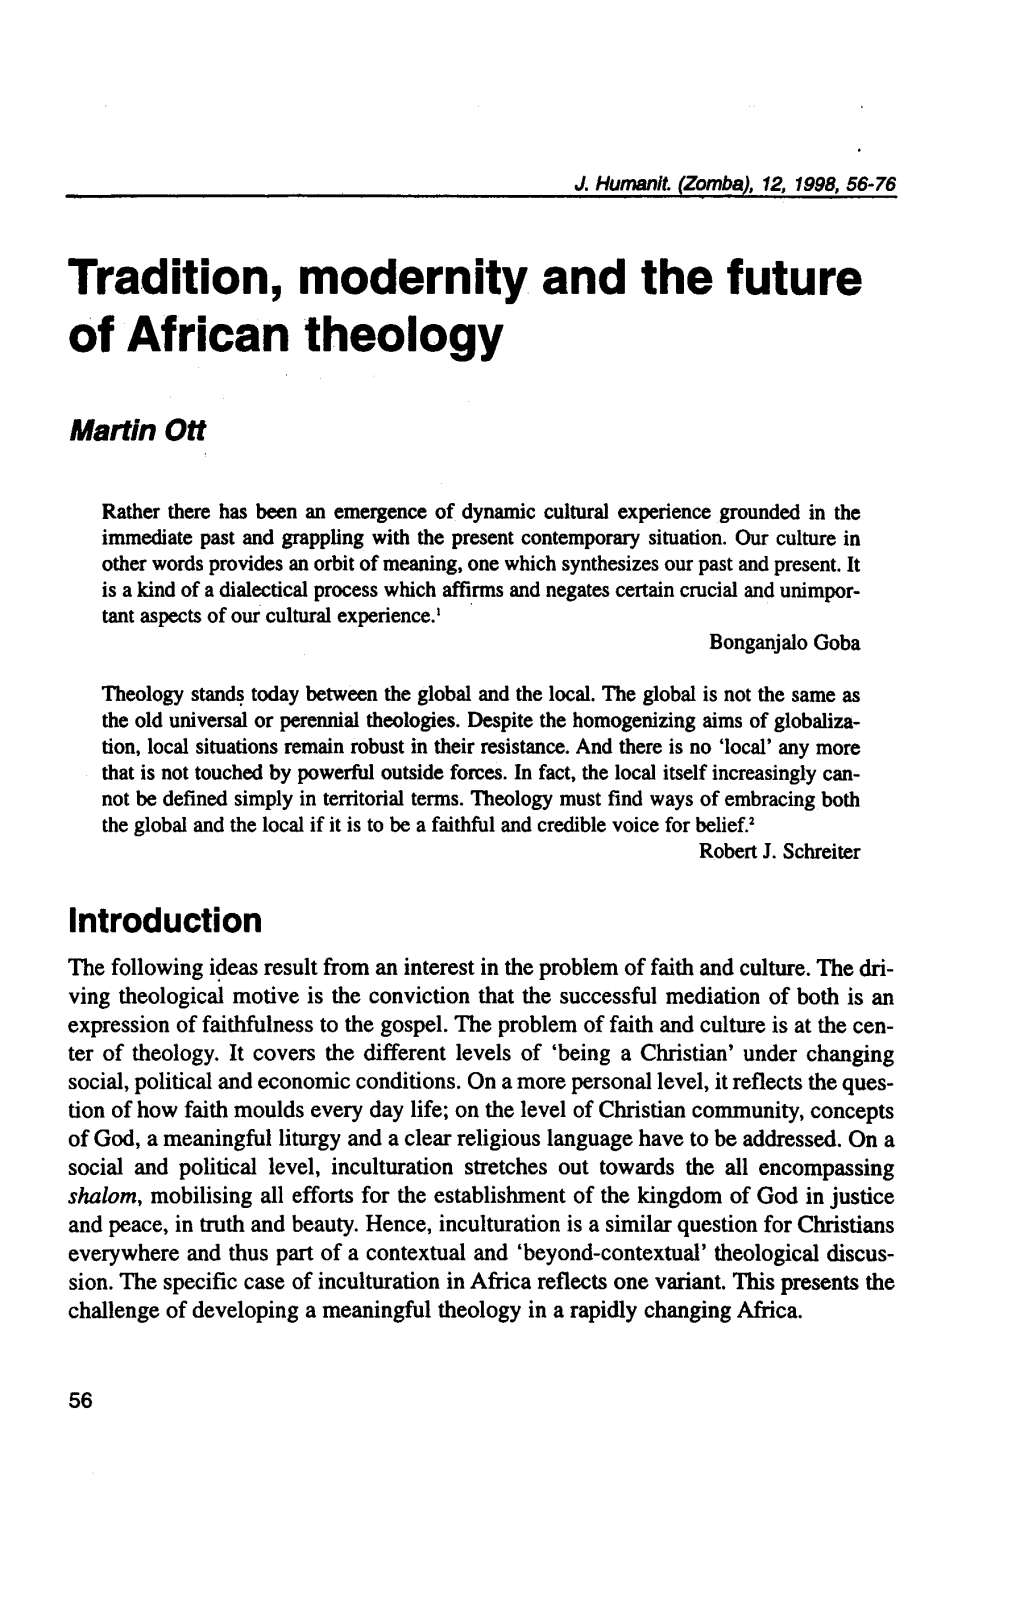 Tradition, Modernity and the Future of African Theology